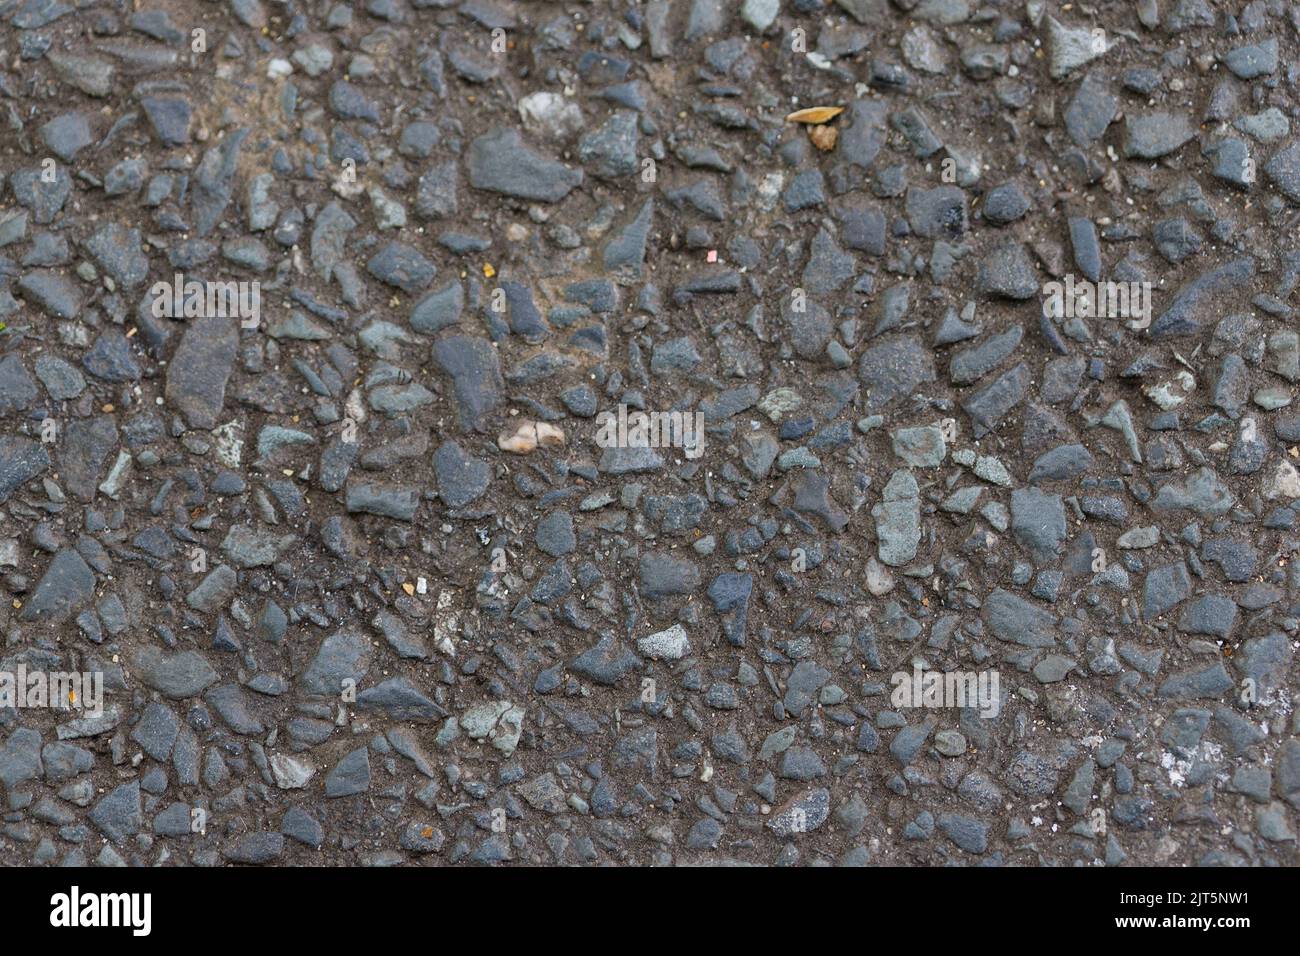 Black tar surface dirty with sand and dirt. Stock Photo